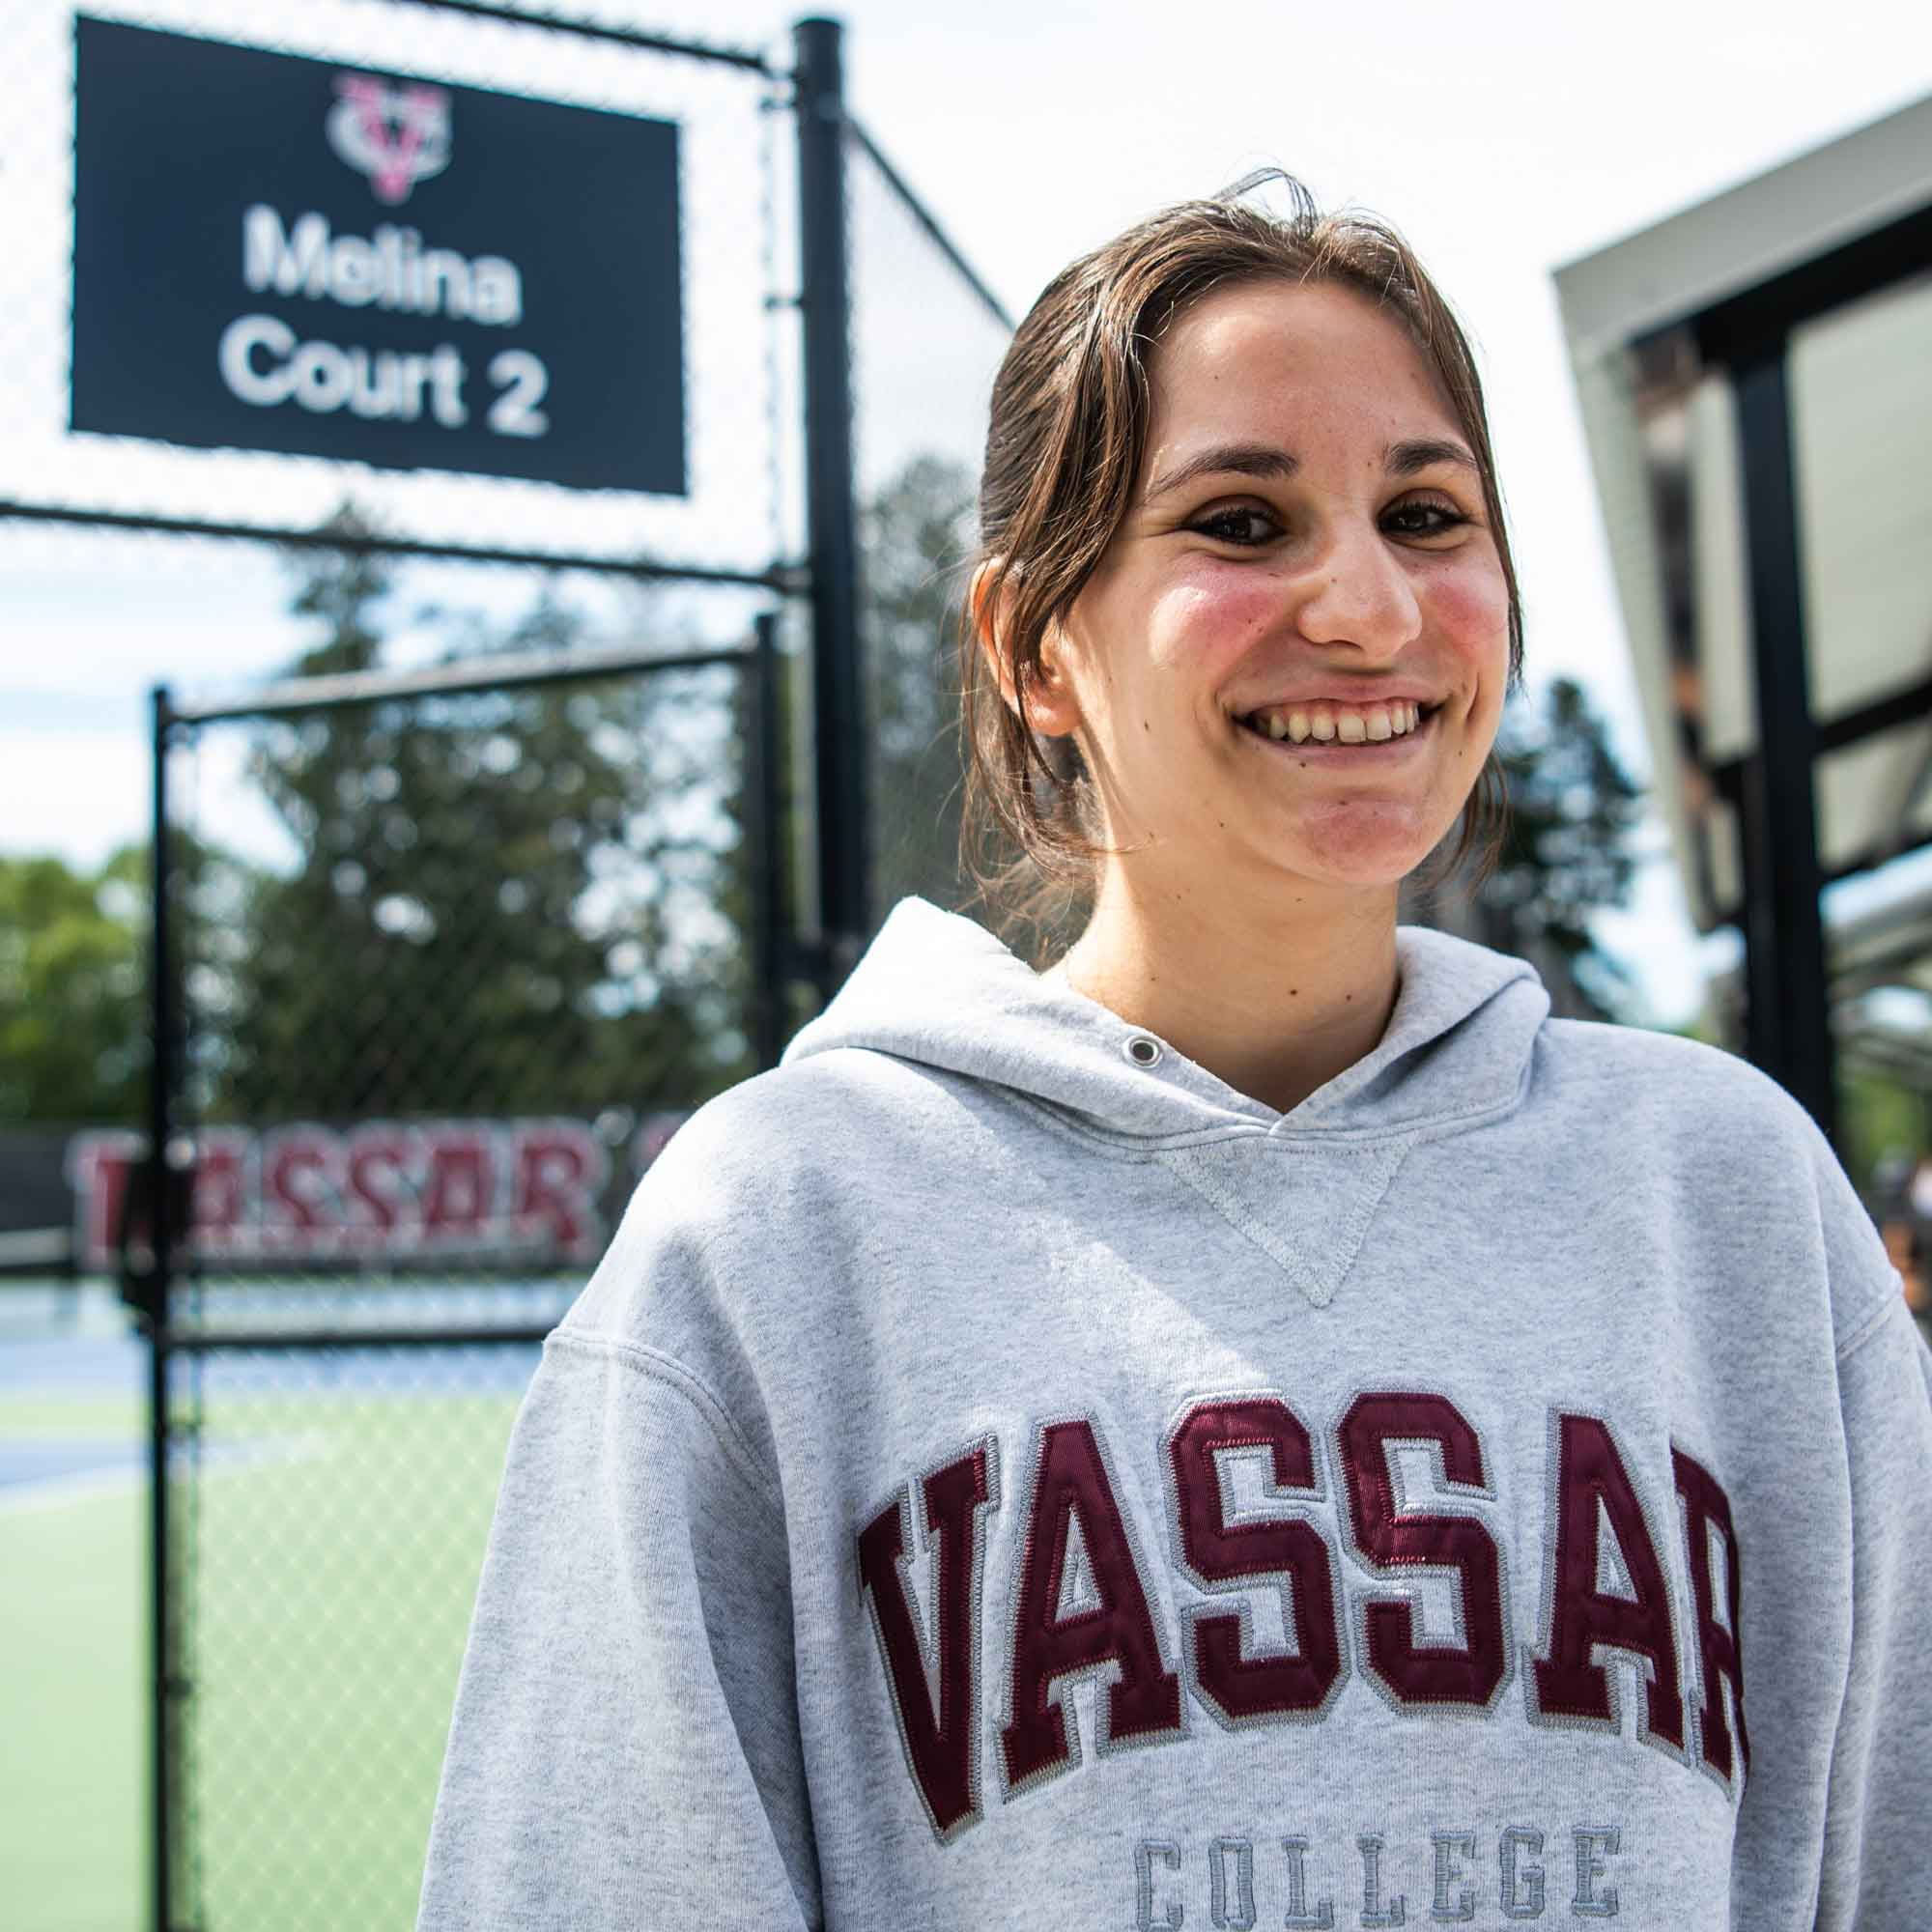 Person standing in front of Melina Court 2 smiling and wearing a Vassar College hooded sweatshirt